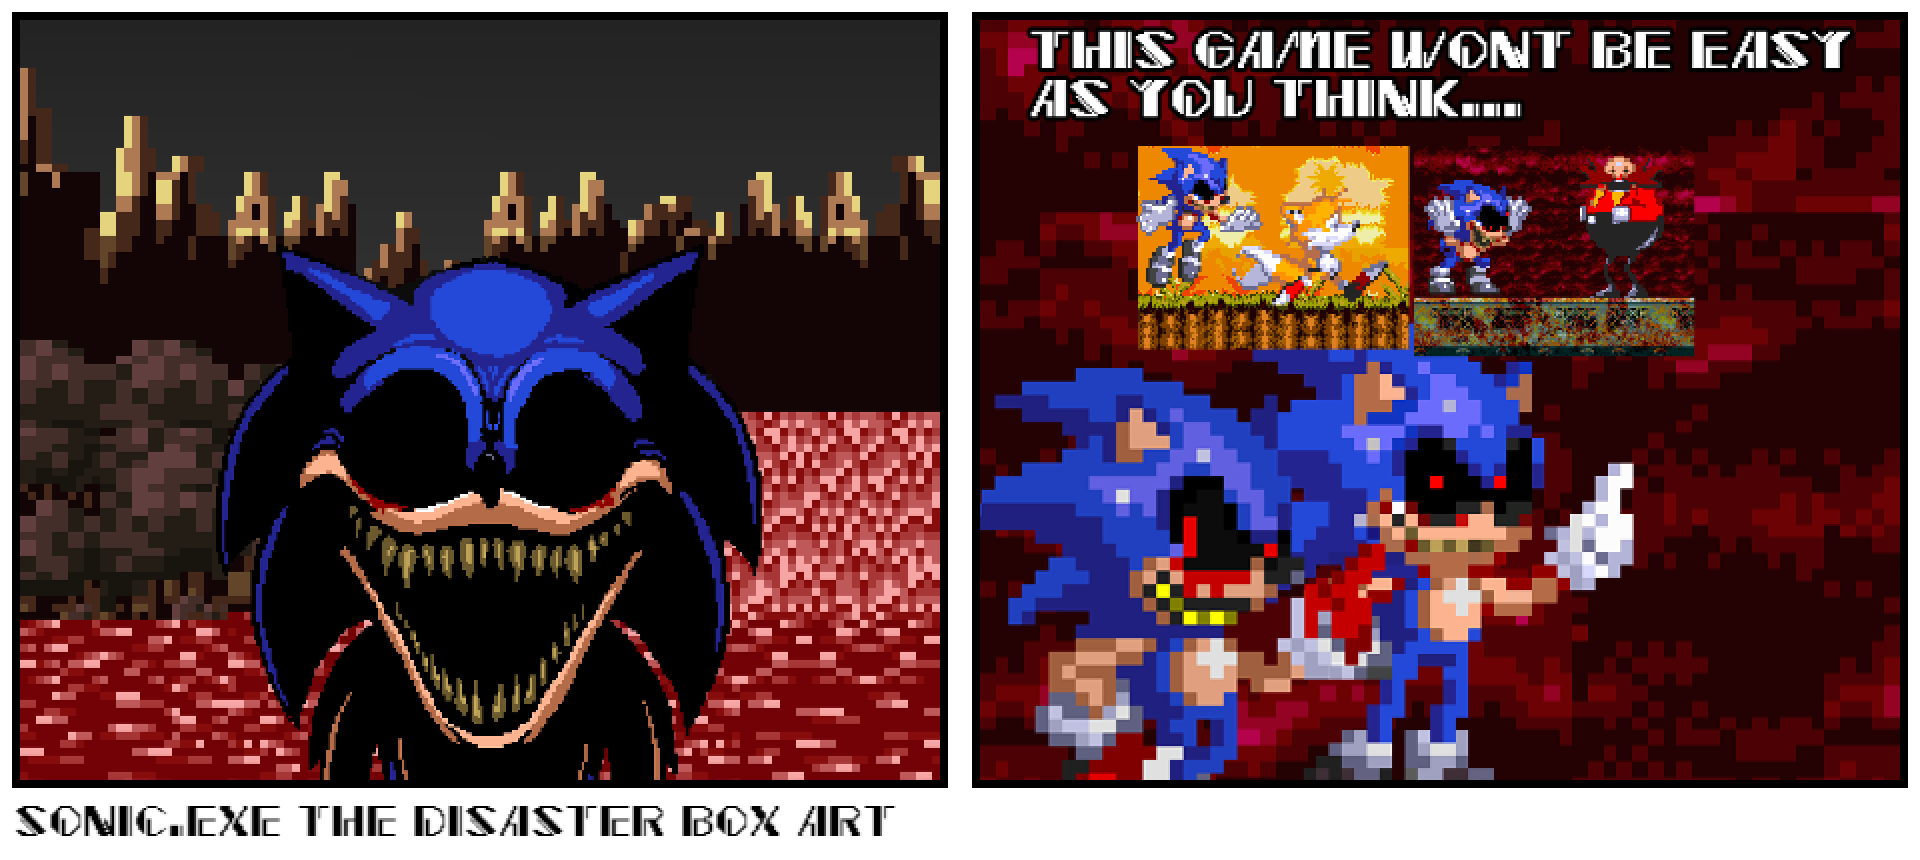 SONIC.EXE THE DISASTER BOX ART